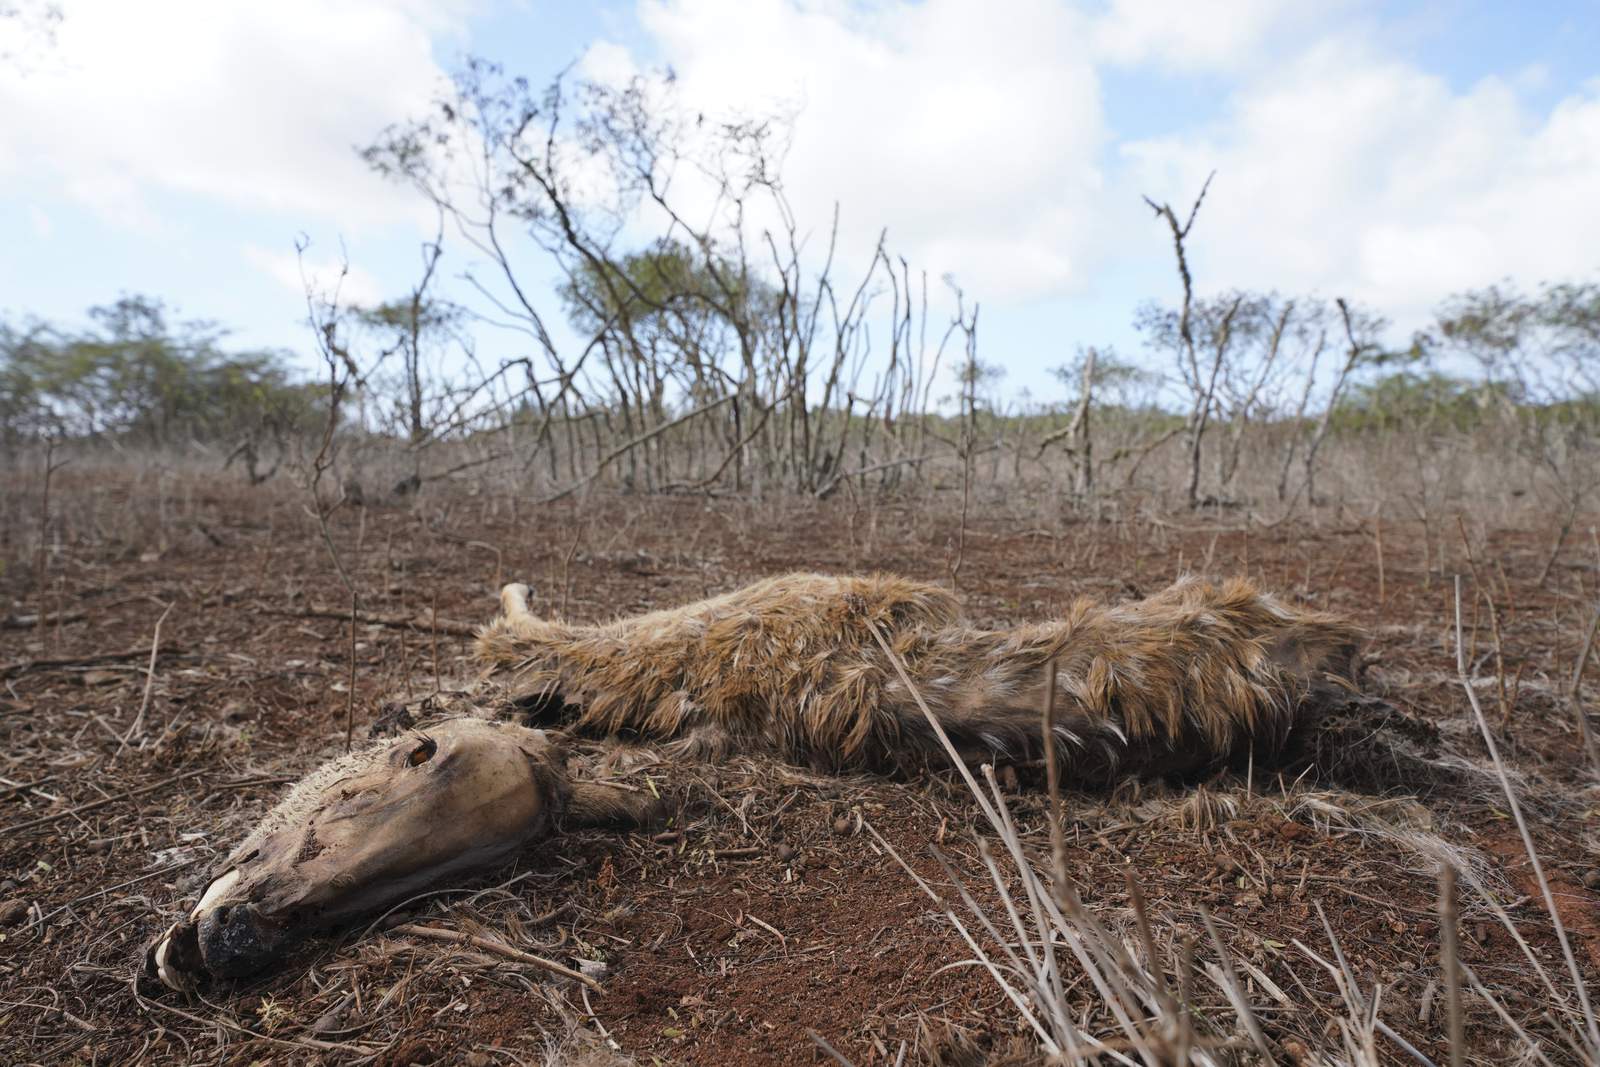 Deer native to India starve to death amid drought in Hawaii